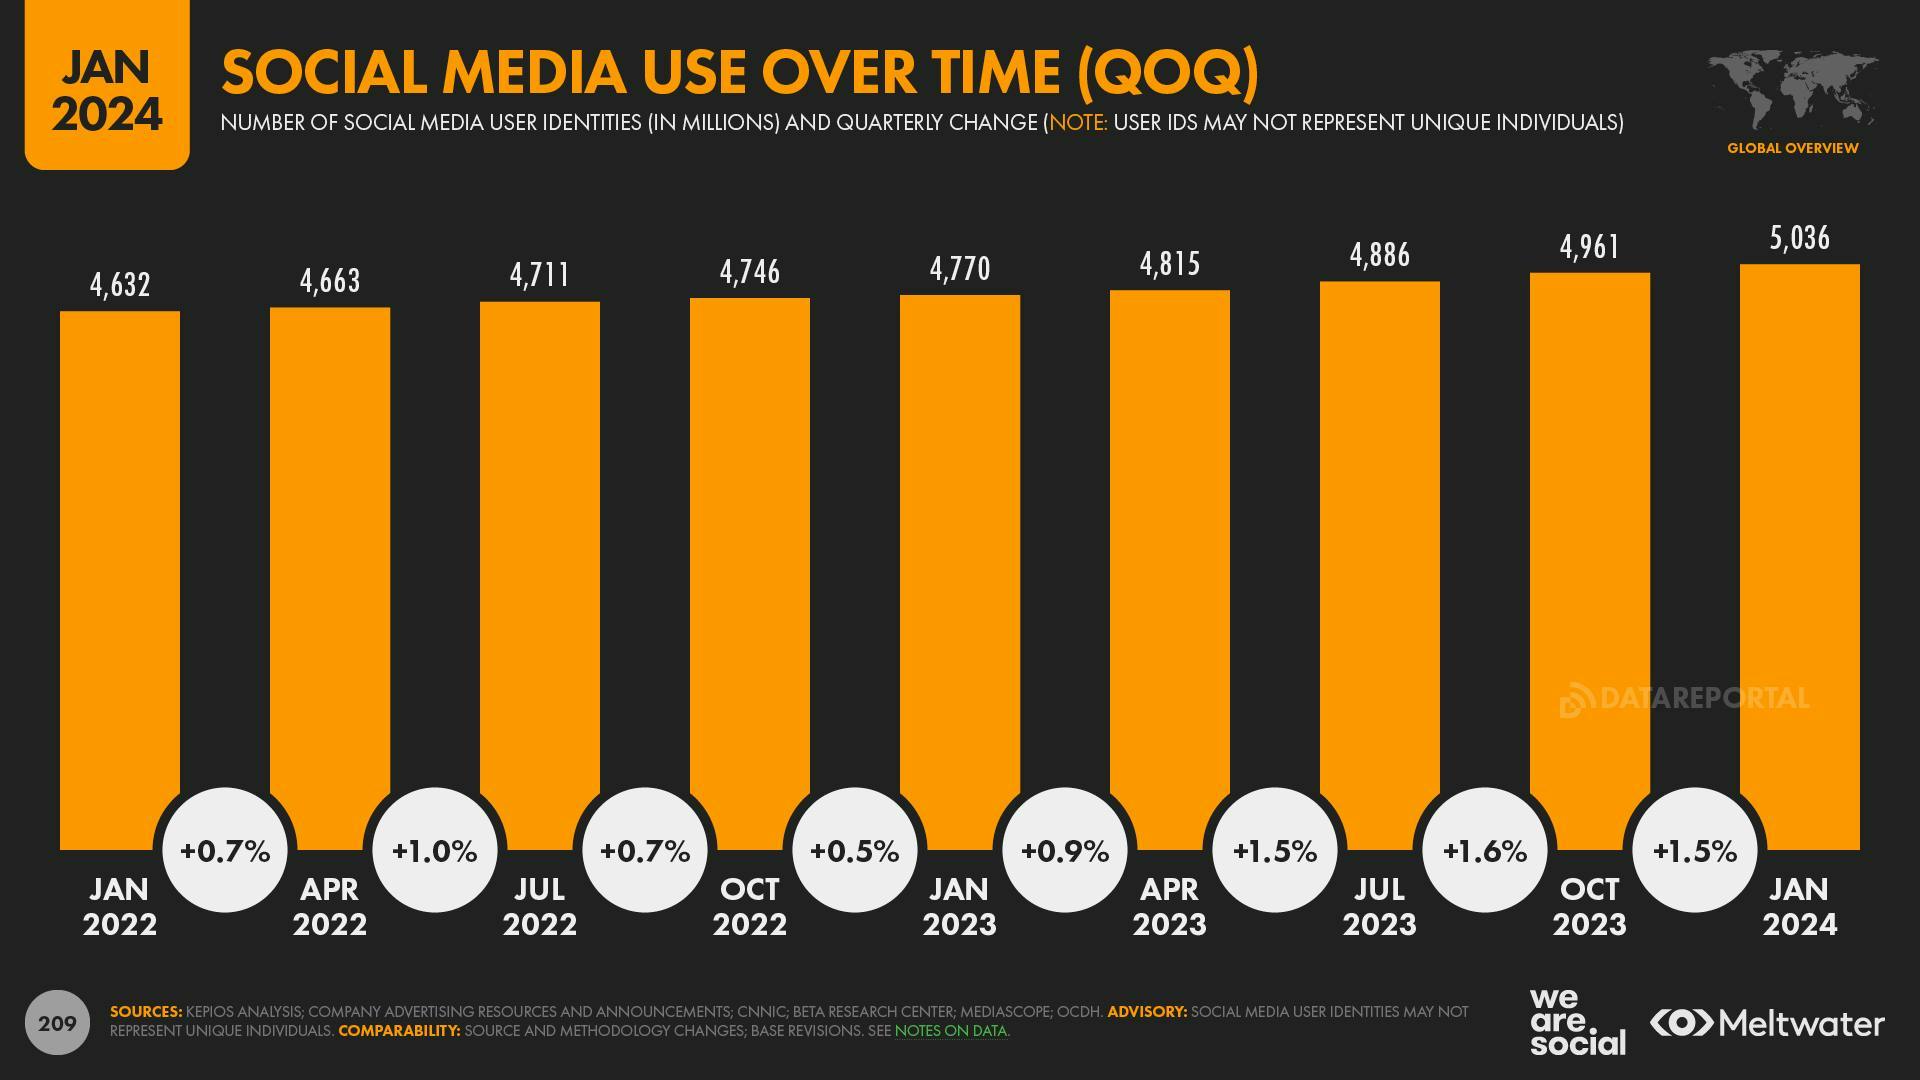 Social media use over time (QOQ) 